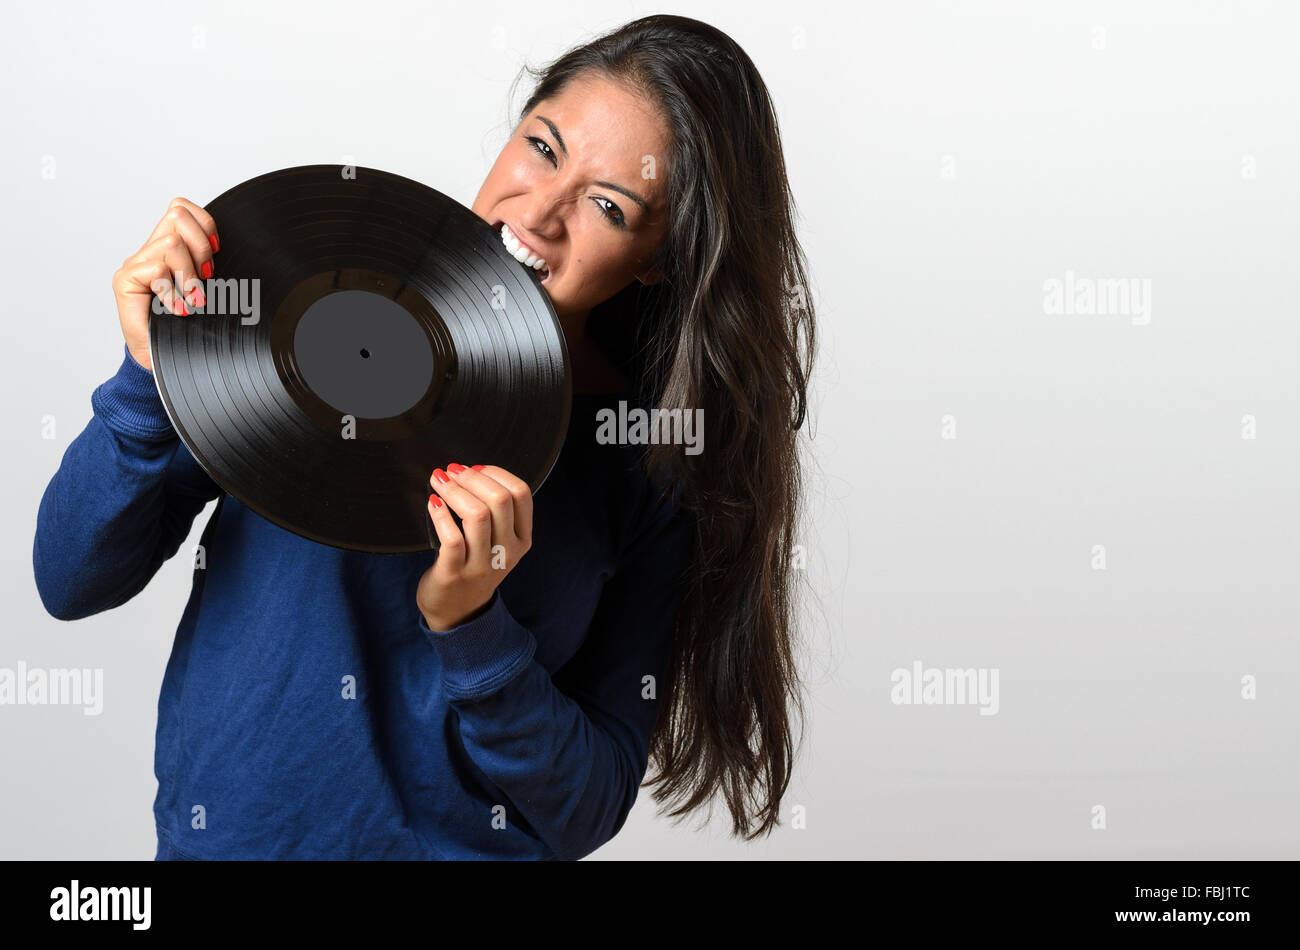 Frustrated attractive young woman biting on a vinyl record with a snarl and frown of anger Stock Photo